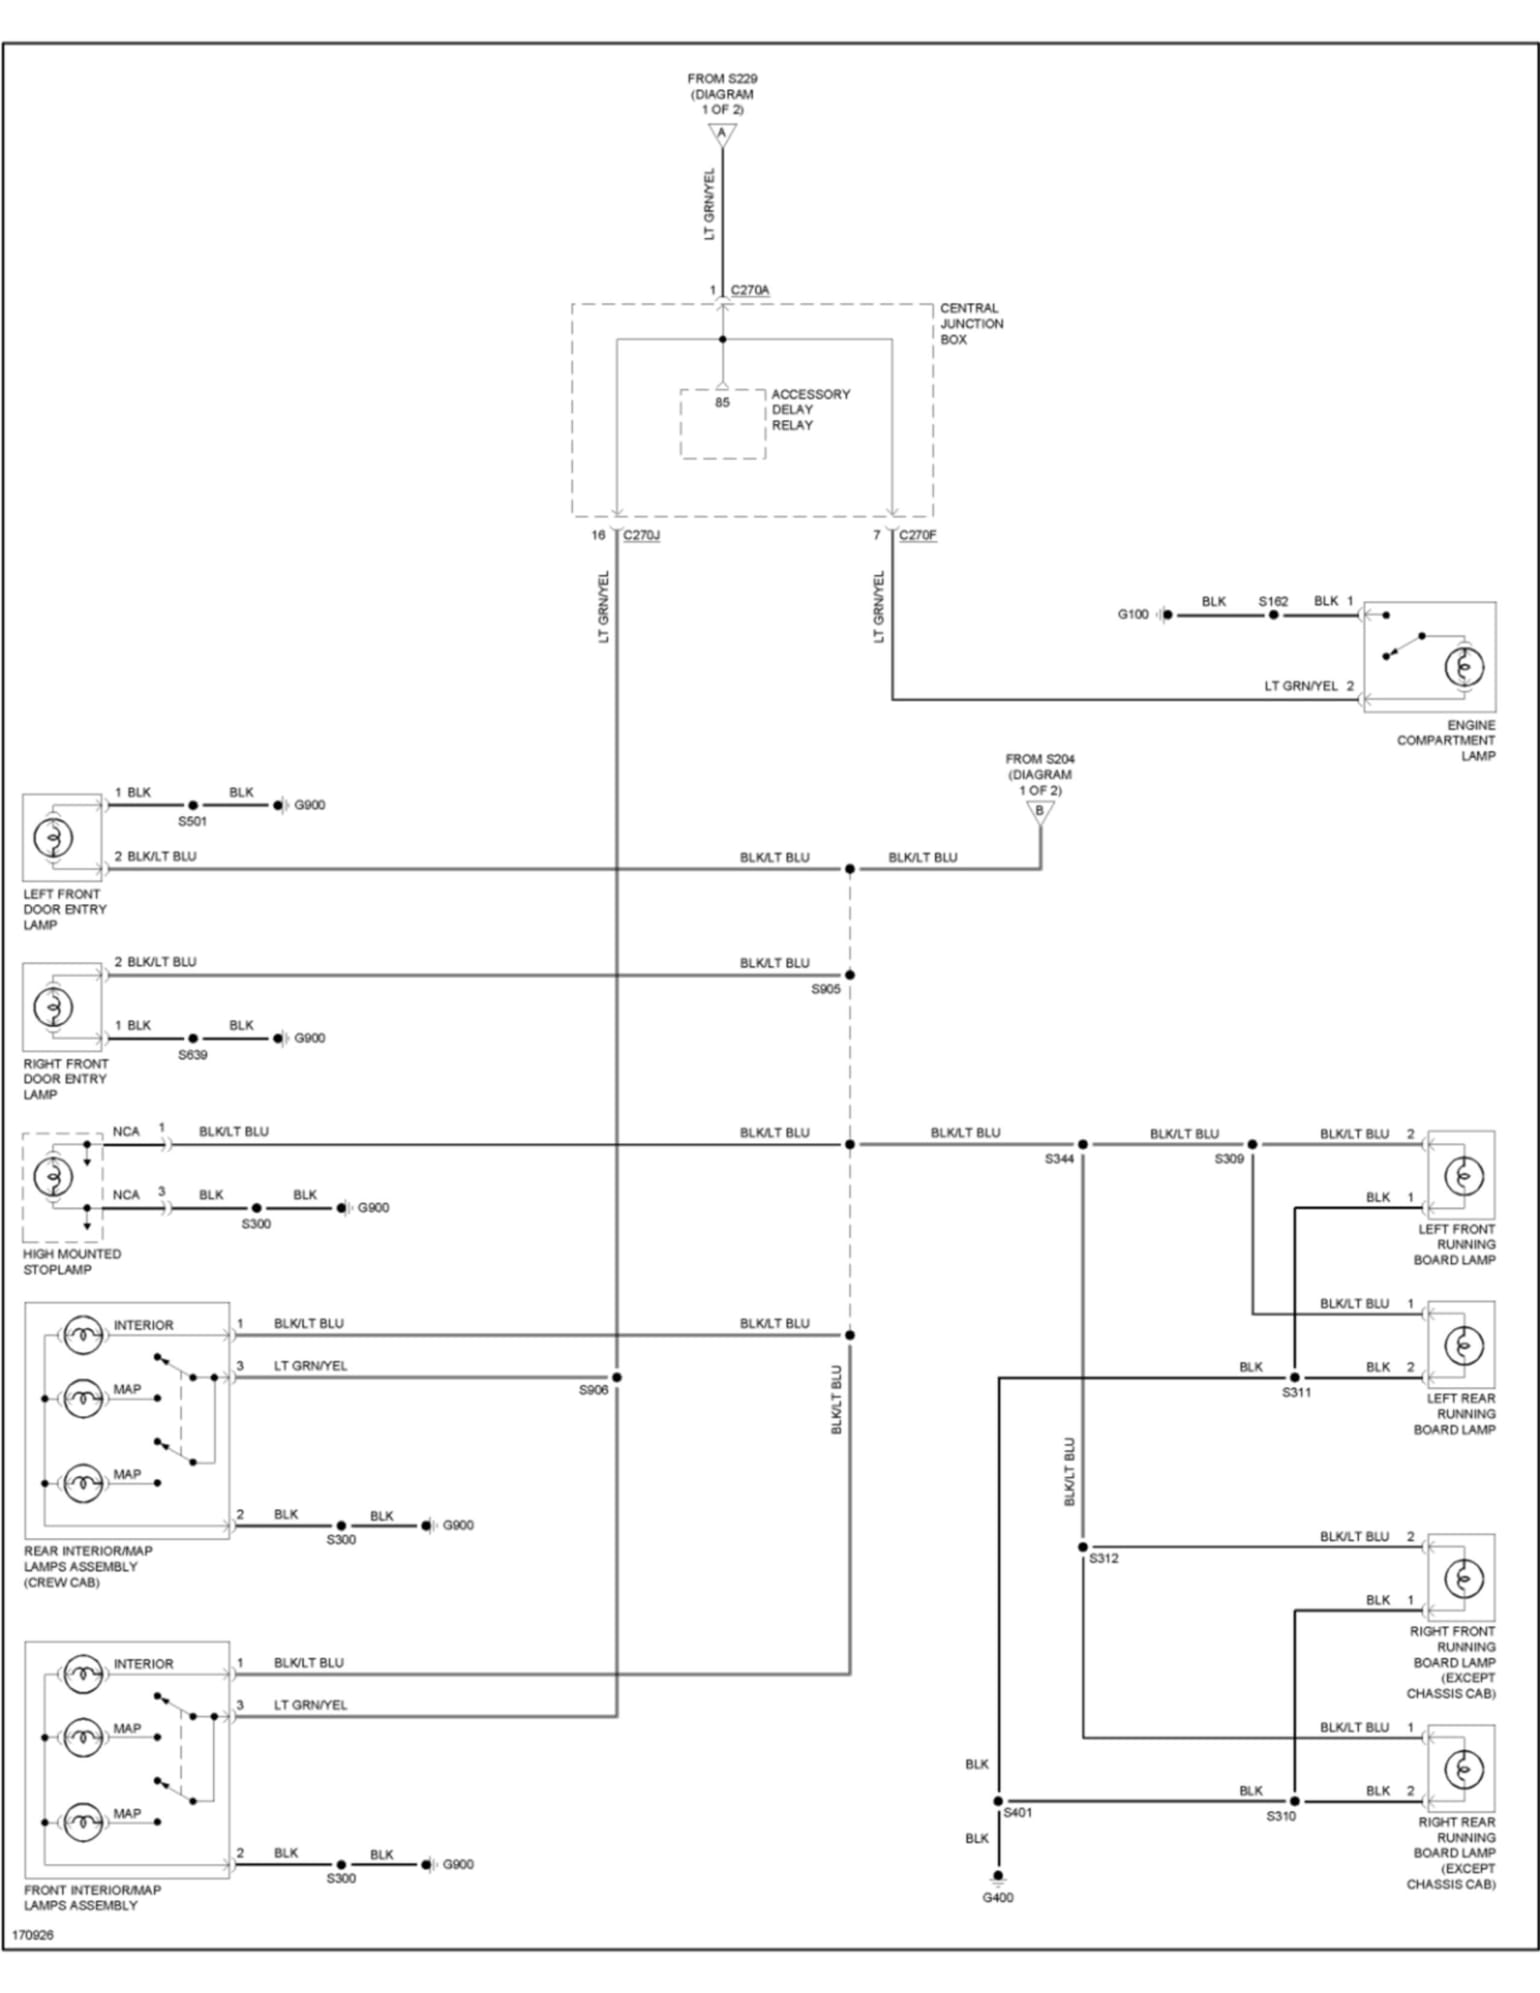 Dome Light Wiring Diagram 03 f250 - Ford Truck Enthusiasts Forums